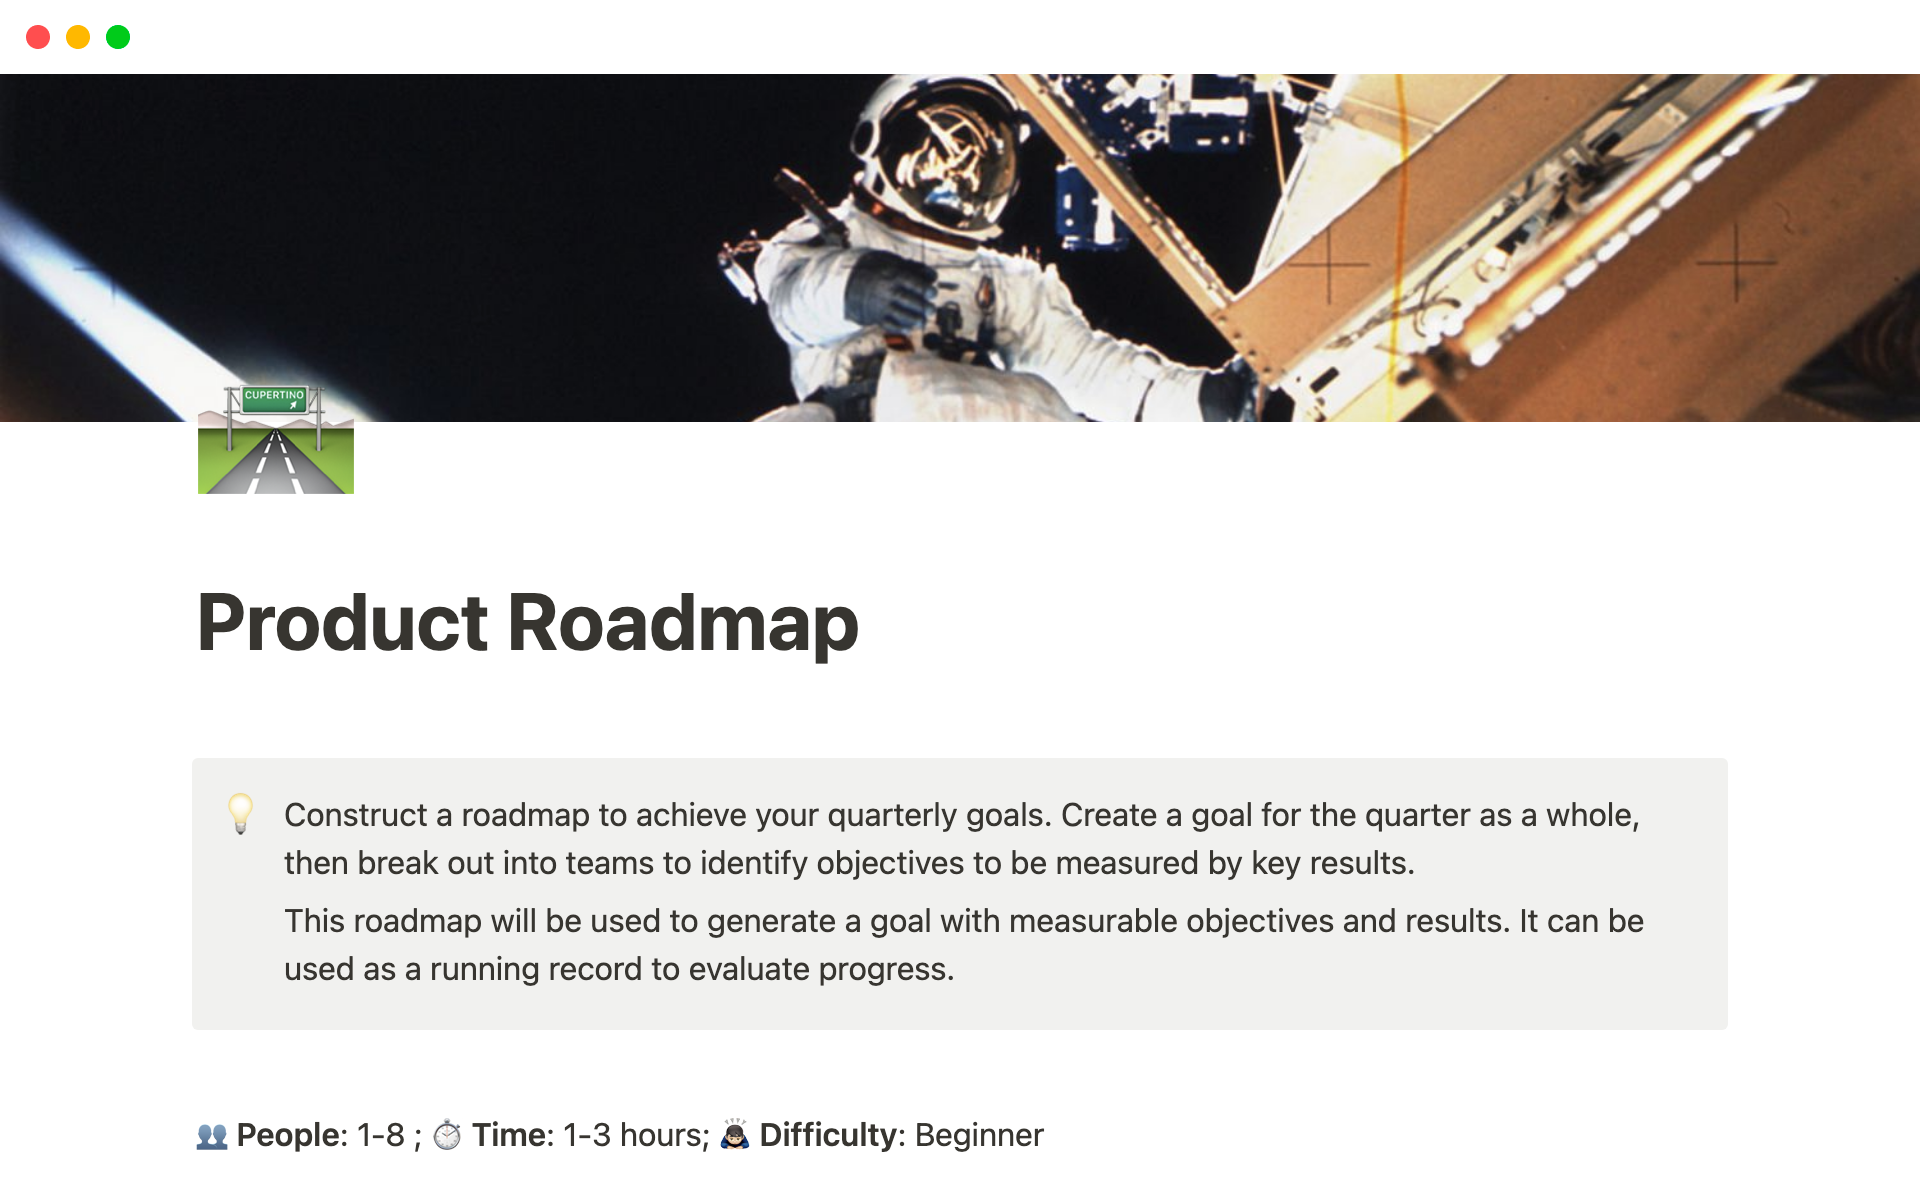 Construct a roadmap to achieve your quarterly goals.